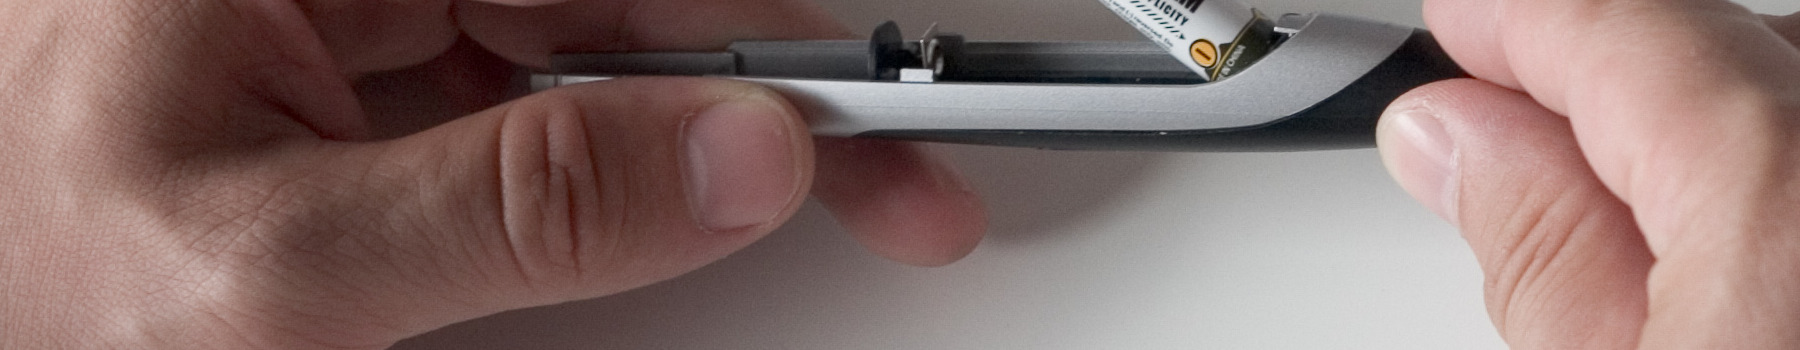 O Pen Wide (P 2004) Battery replacement 1. Hold the pen as shown in the photo 2. Pull firmly the back pen part to separate it from the rest of the pen case 3.